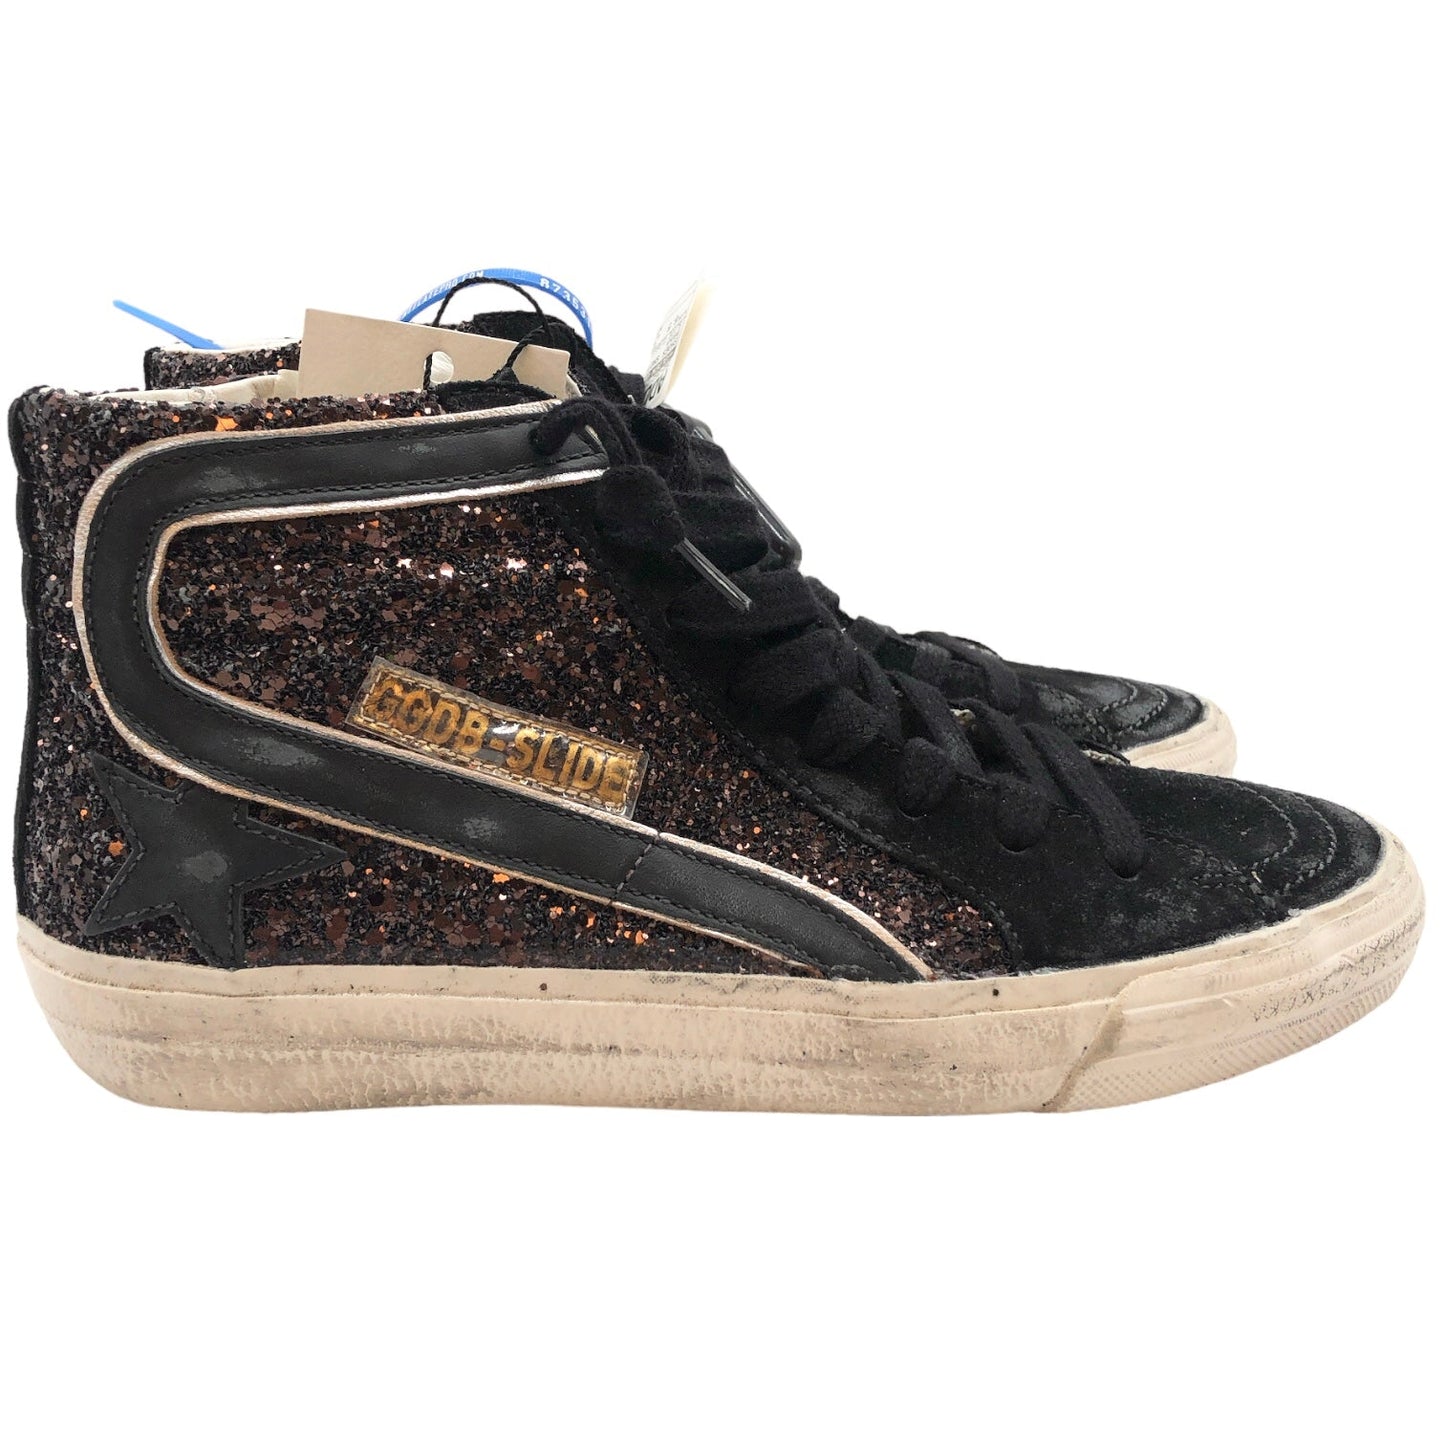 Shoes Sneakers By Golden Goose  Size: 6.5